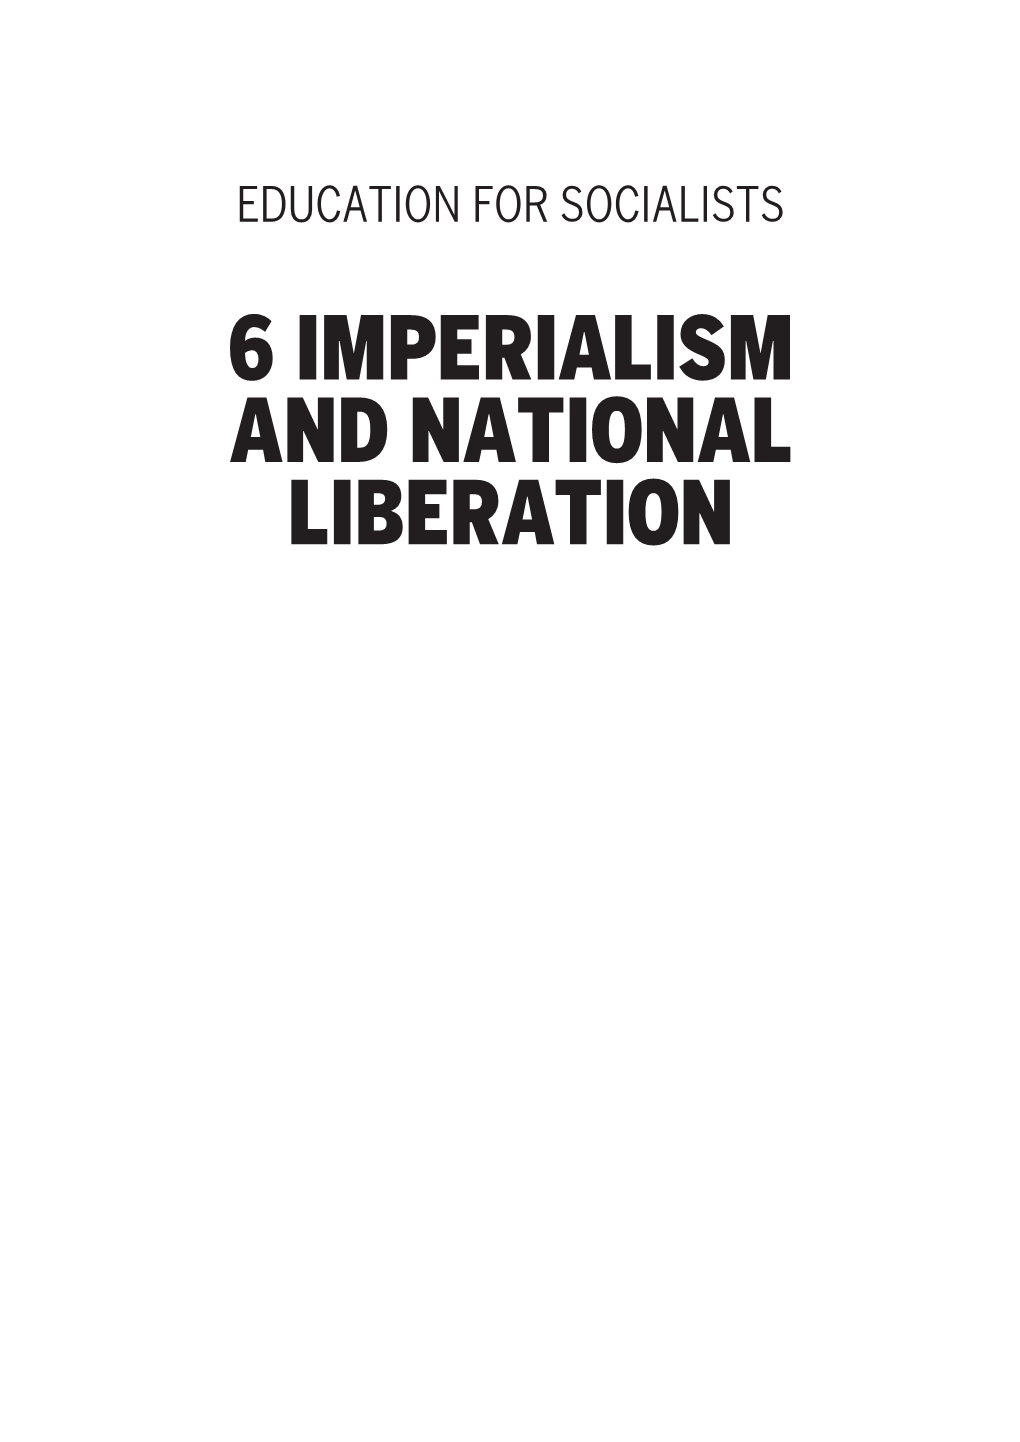 6 Imperialism and National Liberation 2 Education for Socialists